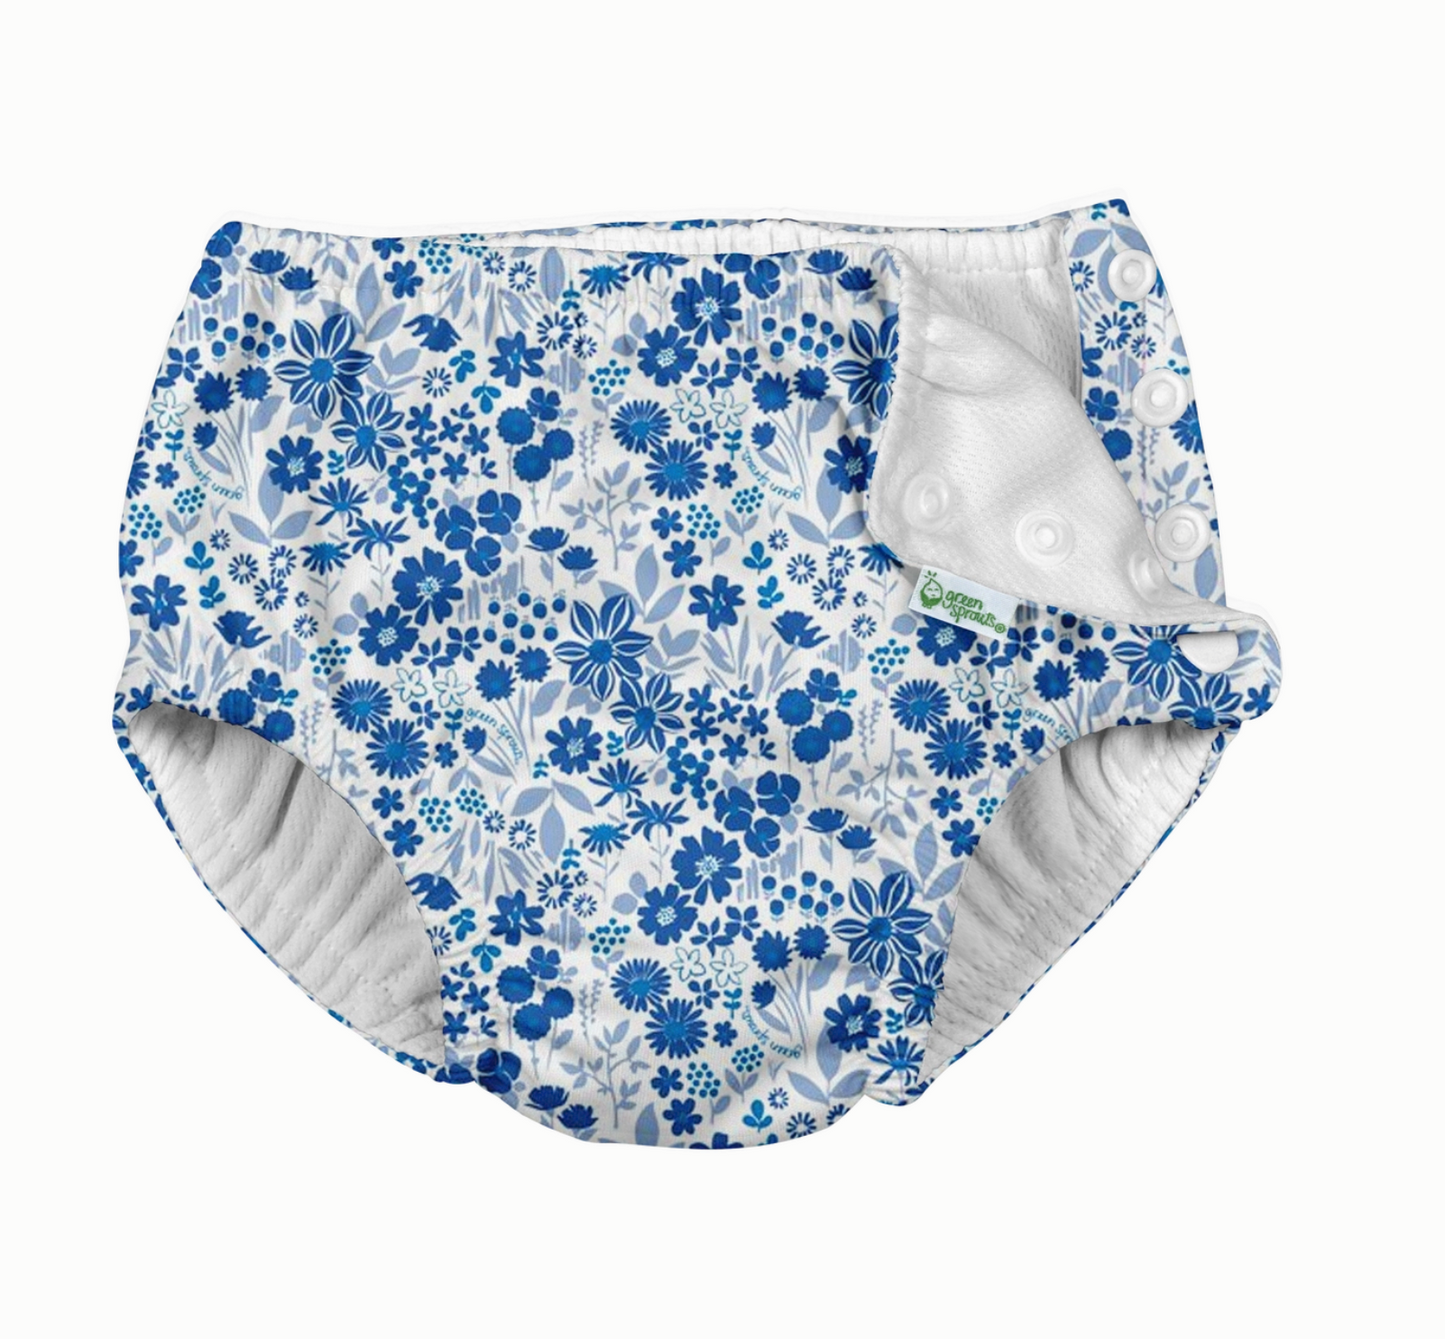 Green Sprouts Snap Reusable Absorbent Swimsuit Diaper - Multiple Prints/Colors